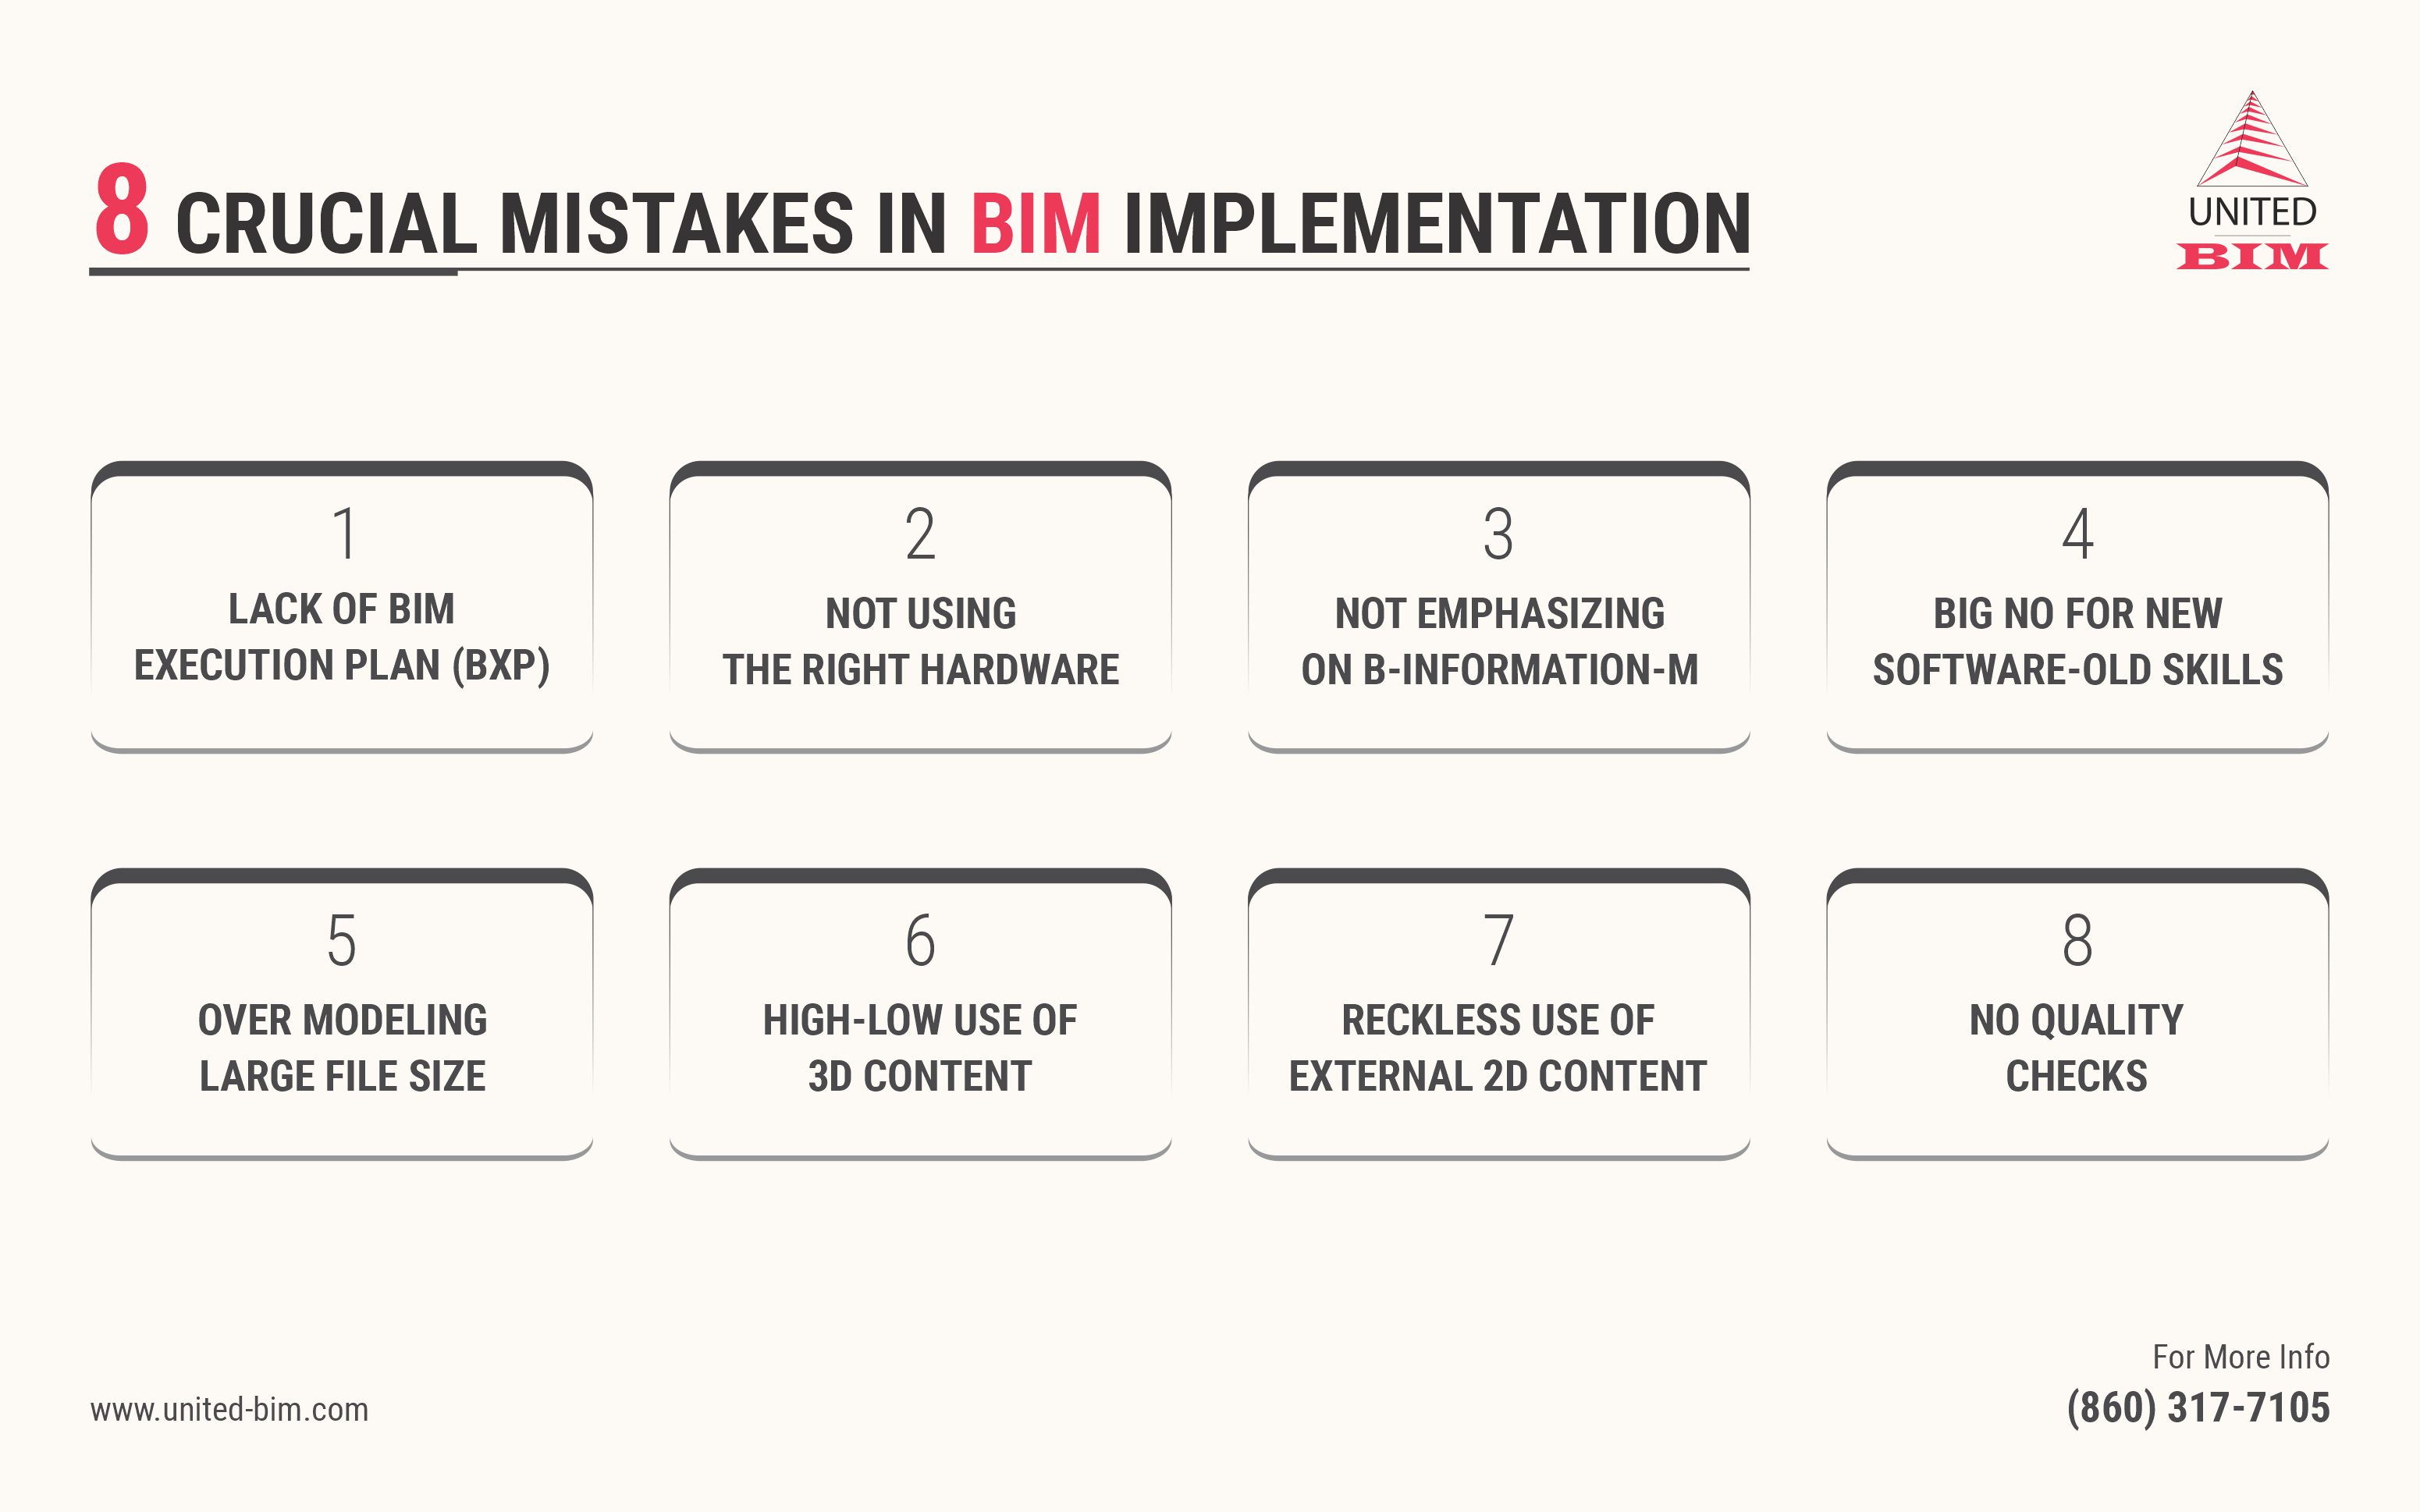 8 CRUCIAL MISTAKES IN BIM IMPLEMENTATION